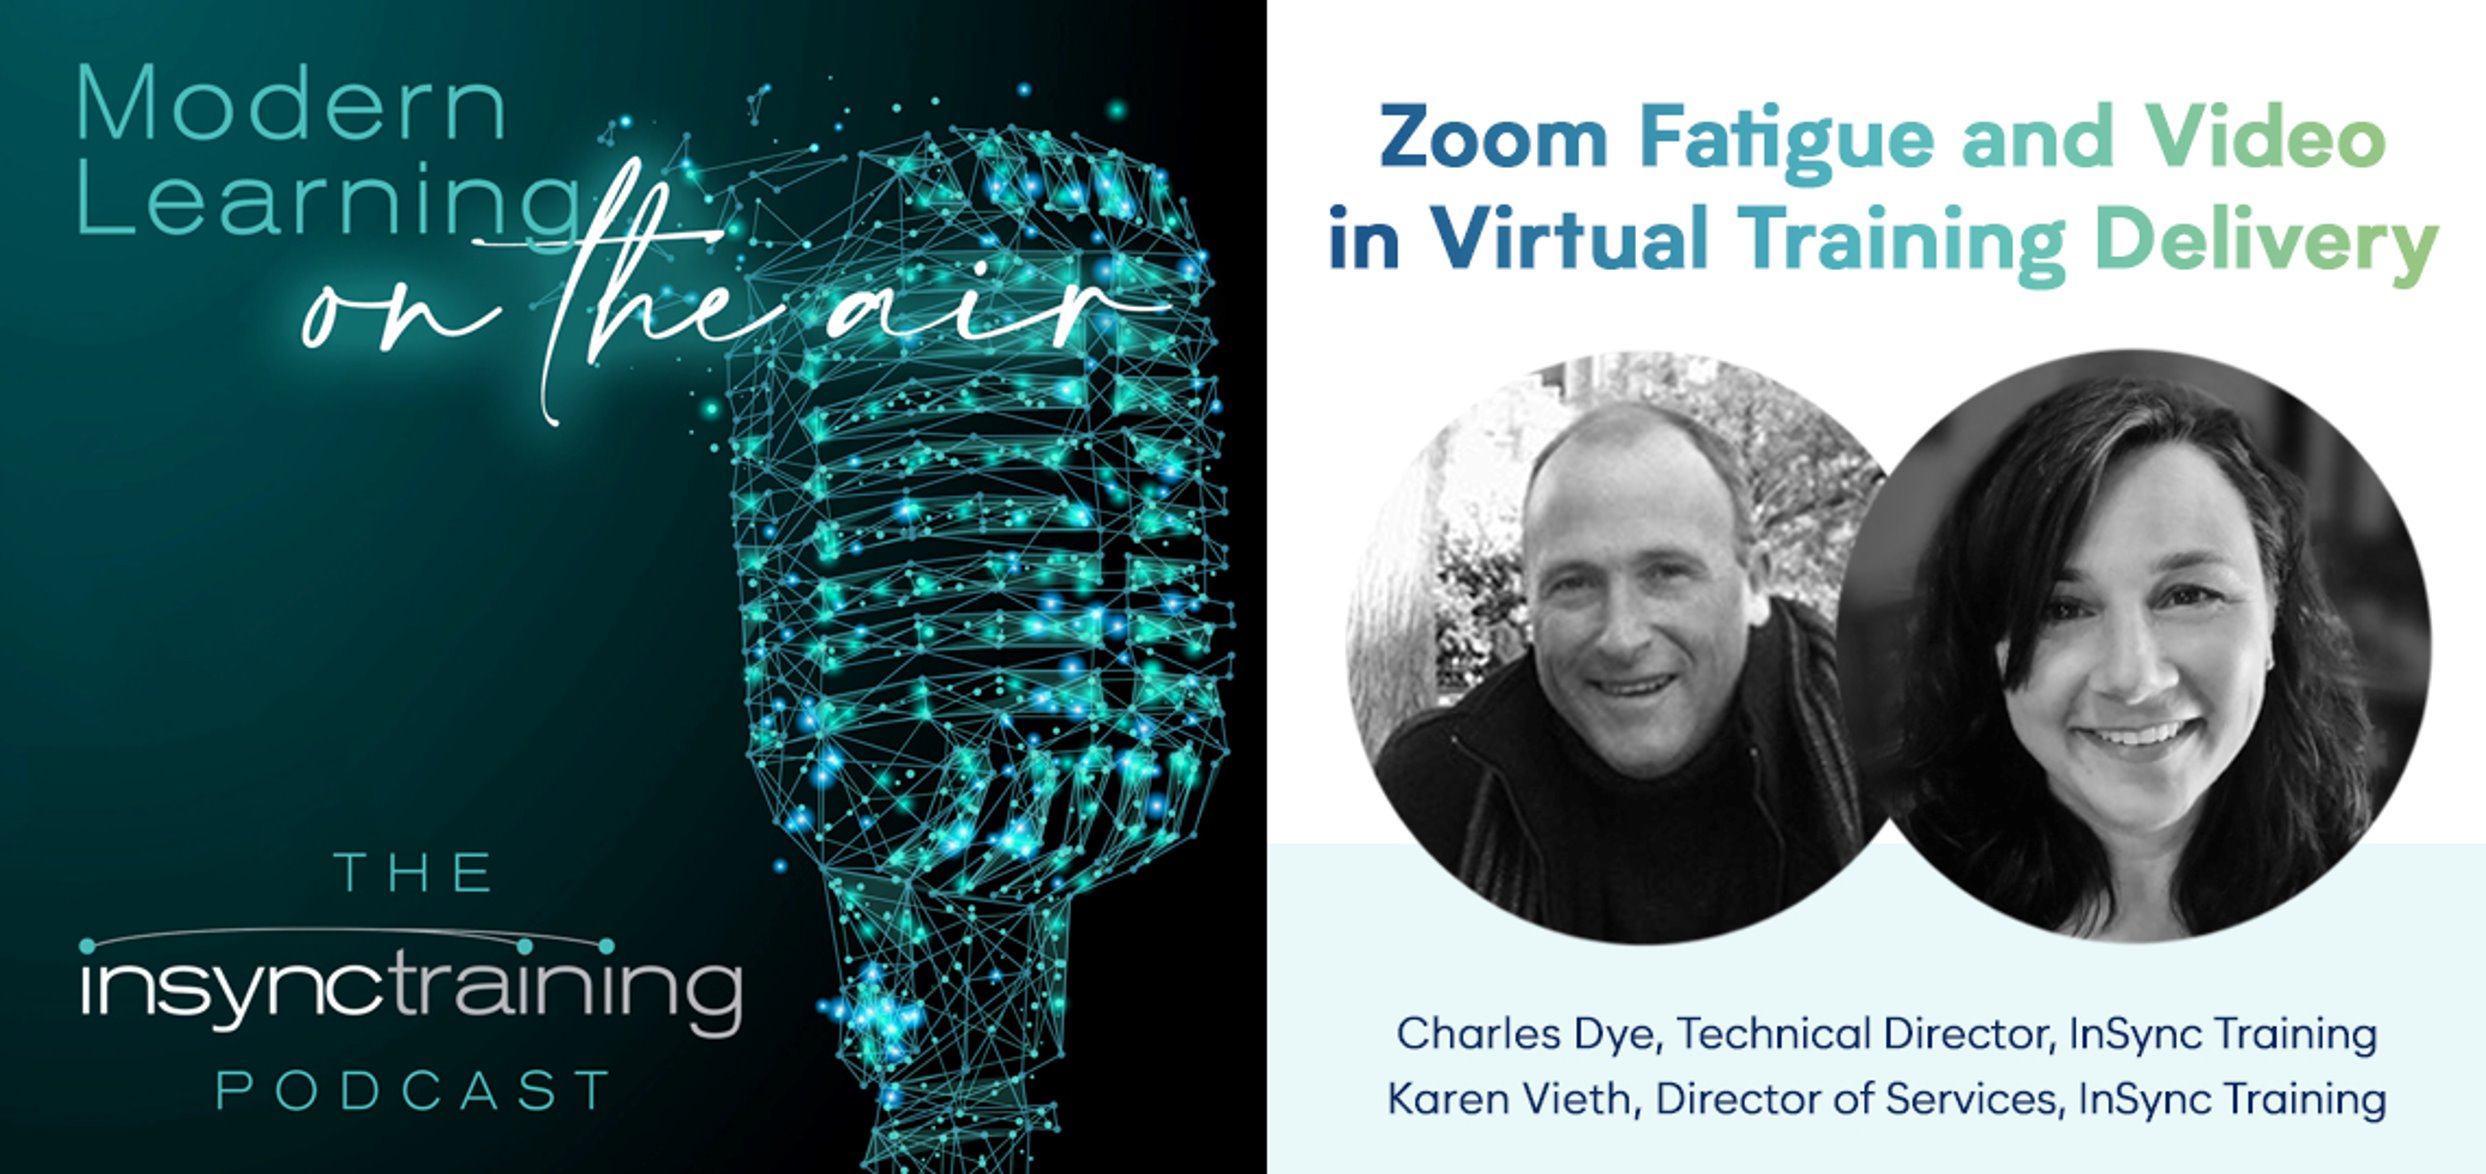 Podcast: Zoom Fatigue and Video in Hybrid & Virtual Training Delivery